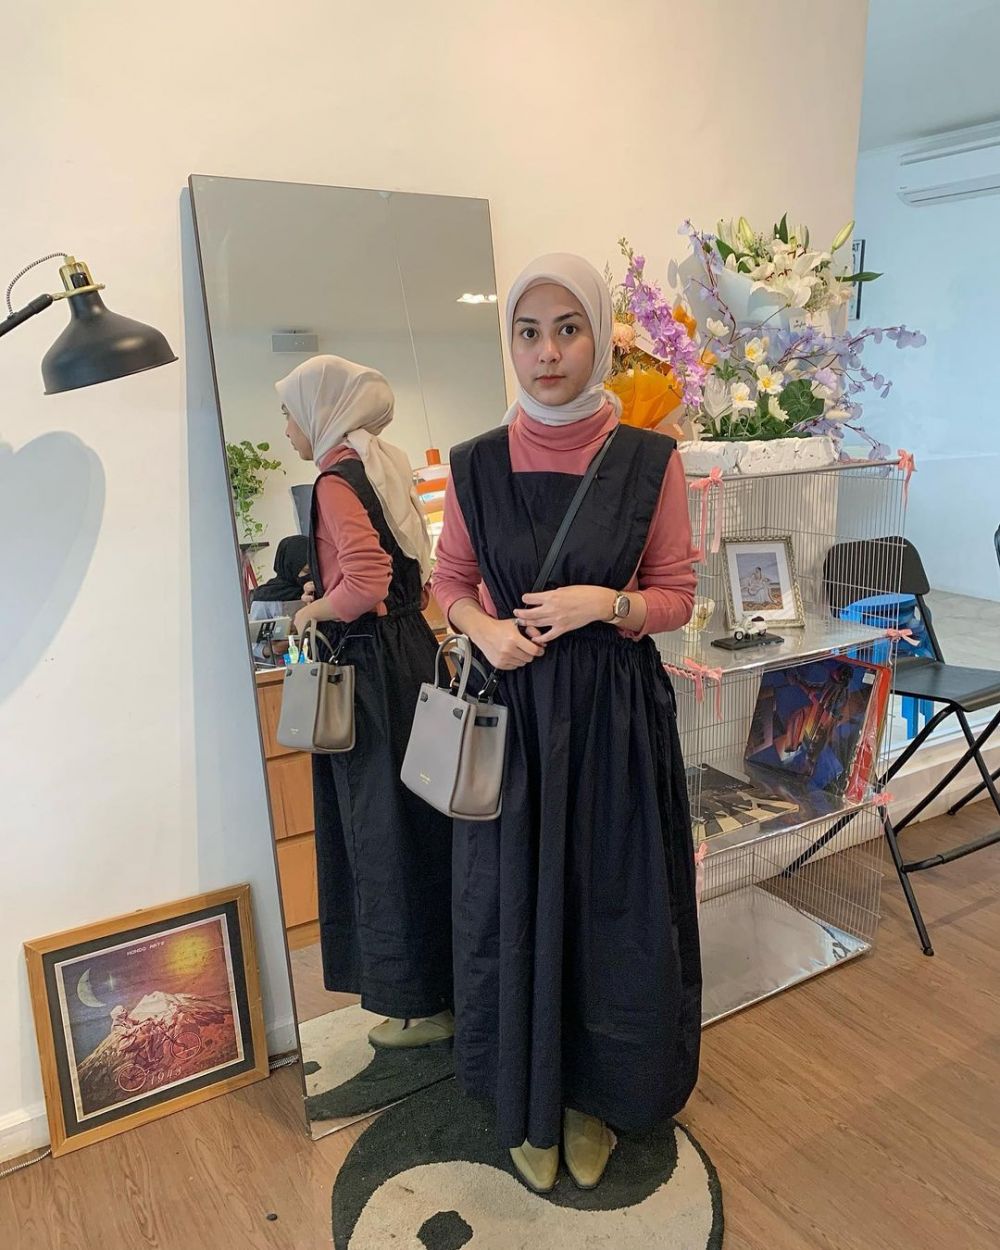 10 Ide Outfit Girly ala Dianty Annisa, Chic Buat OOTD!